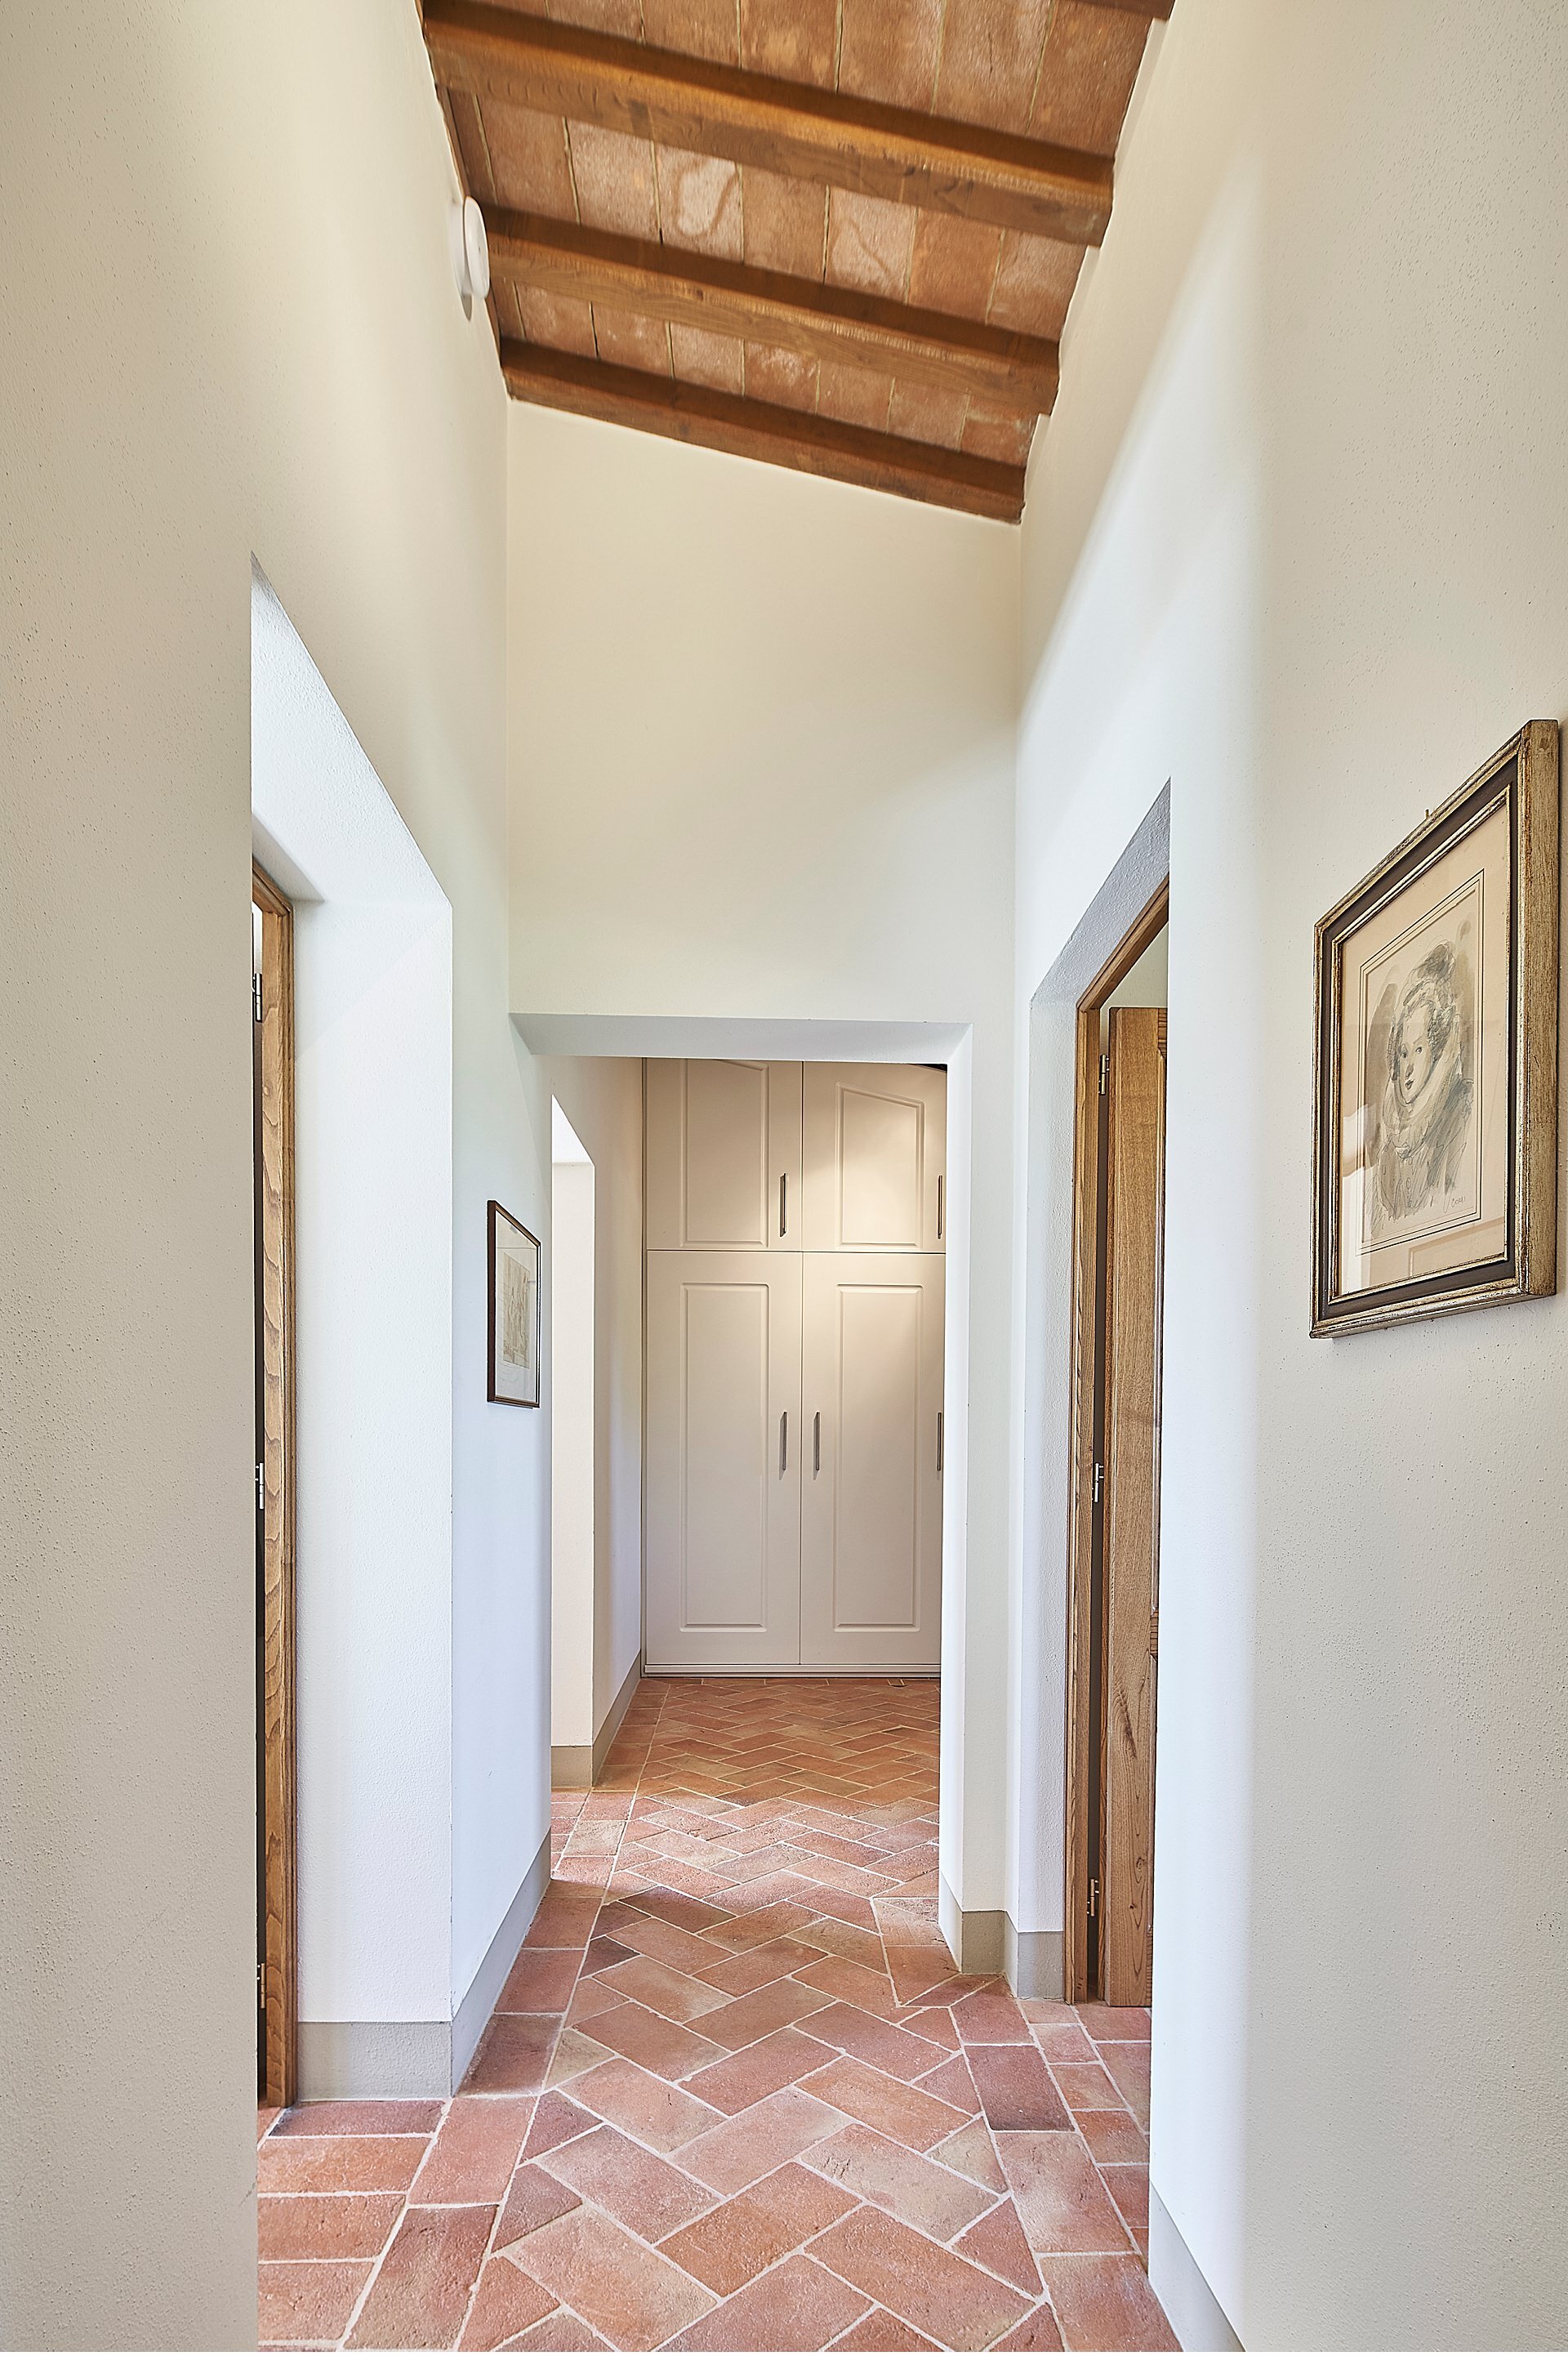  Charming cottage in Chianni, in Tuscany, behind Volterra, between Pisa, Florence and Siena. A landscape immersed in the clay for this holiday cottage surrounded by the woods. The property has renovated an old structure maintaining the Tuscan style w